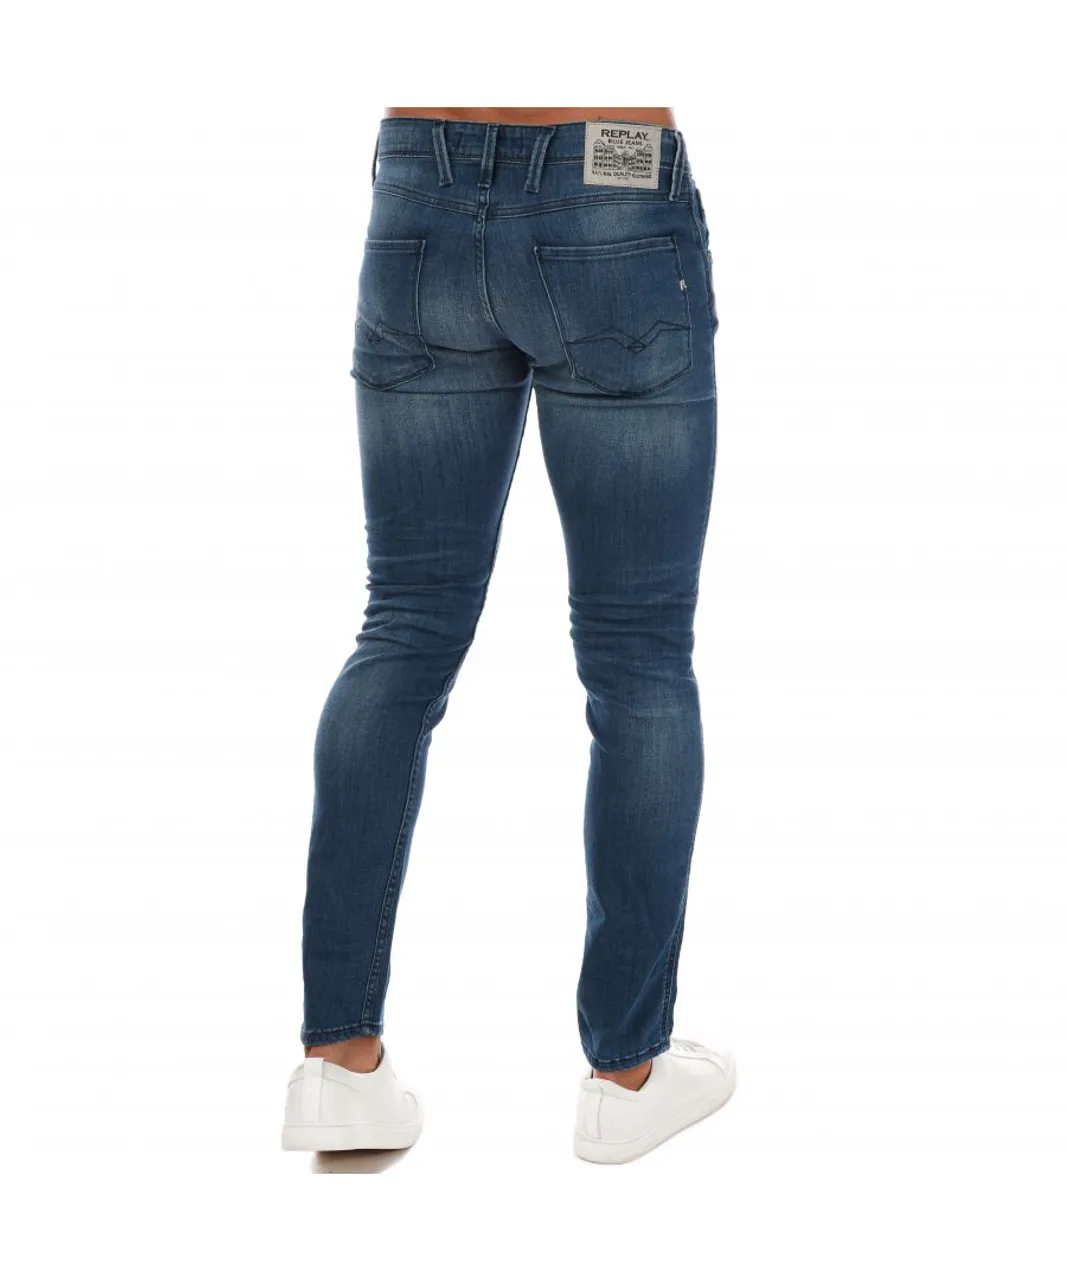 Replay Mens Anbass Slim Fit Jeans in Blue Cotton